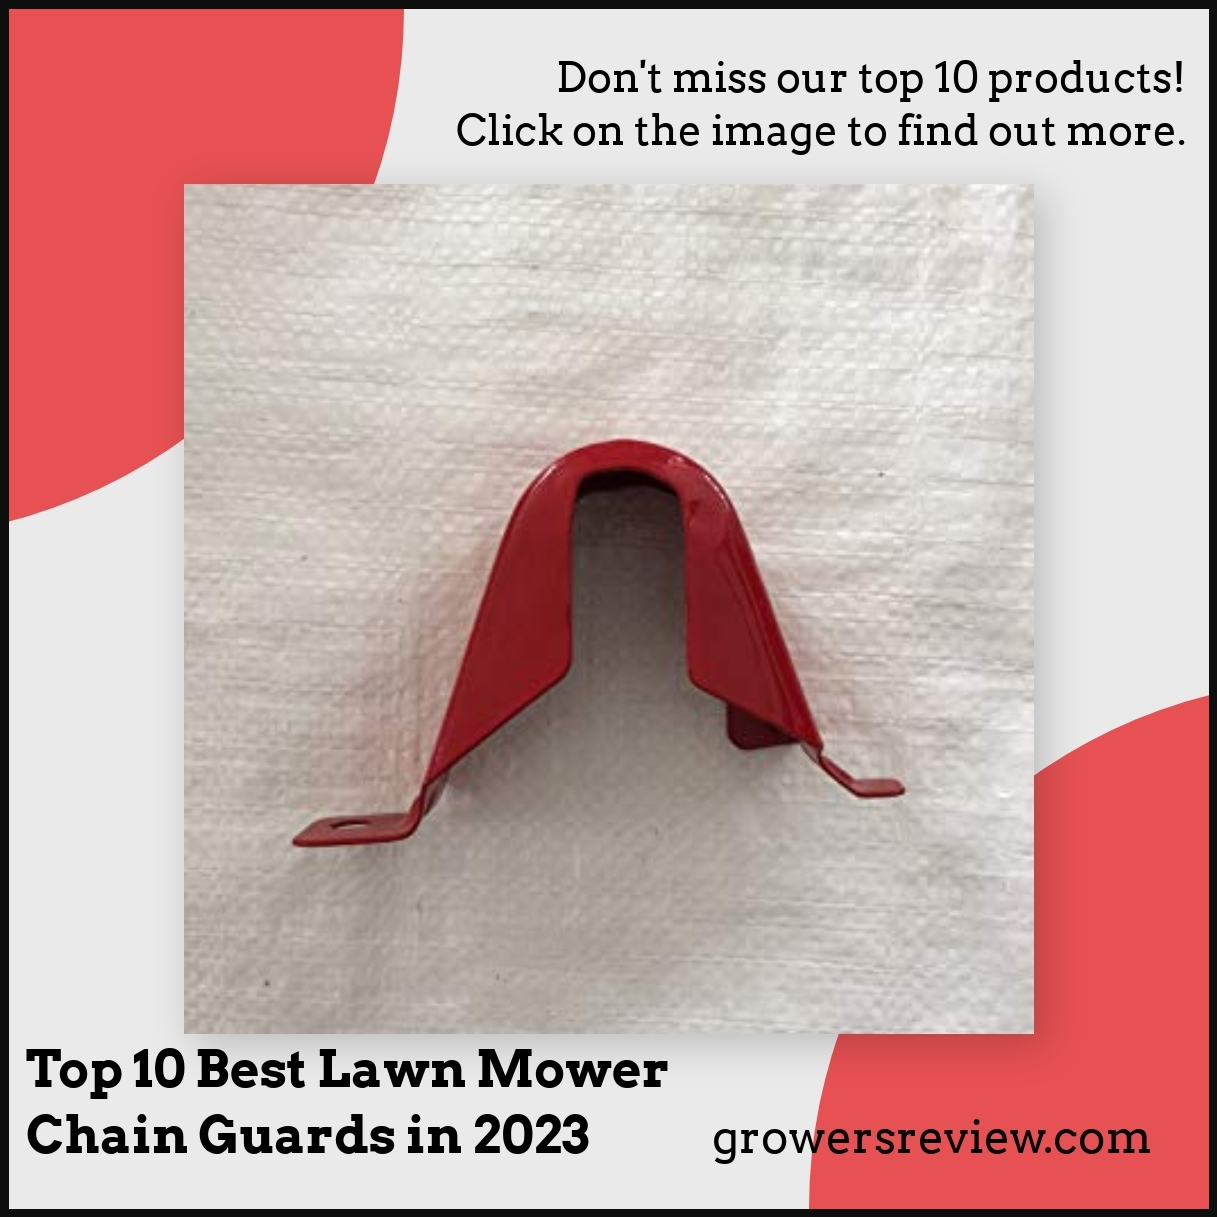 Top 10 Best Lawn Mower Chain Guards in 2023